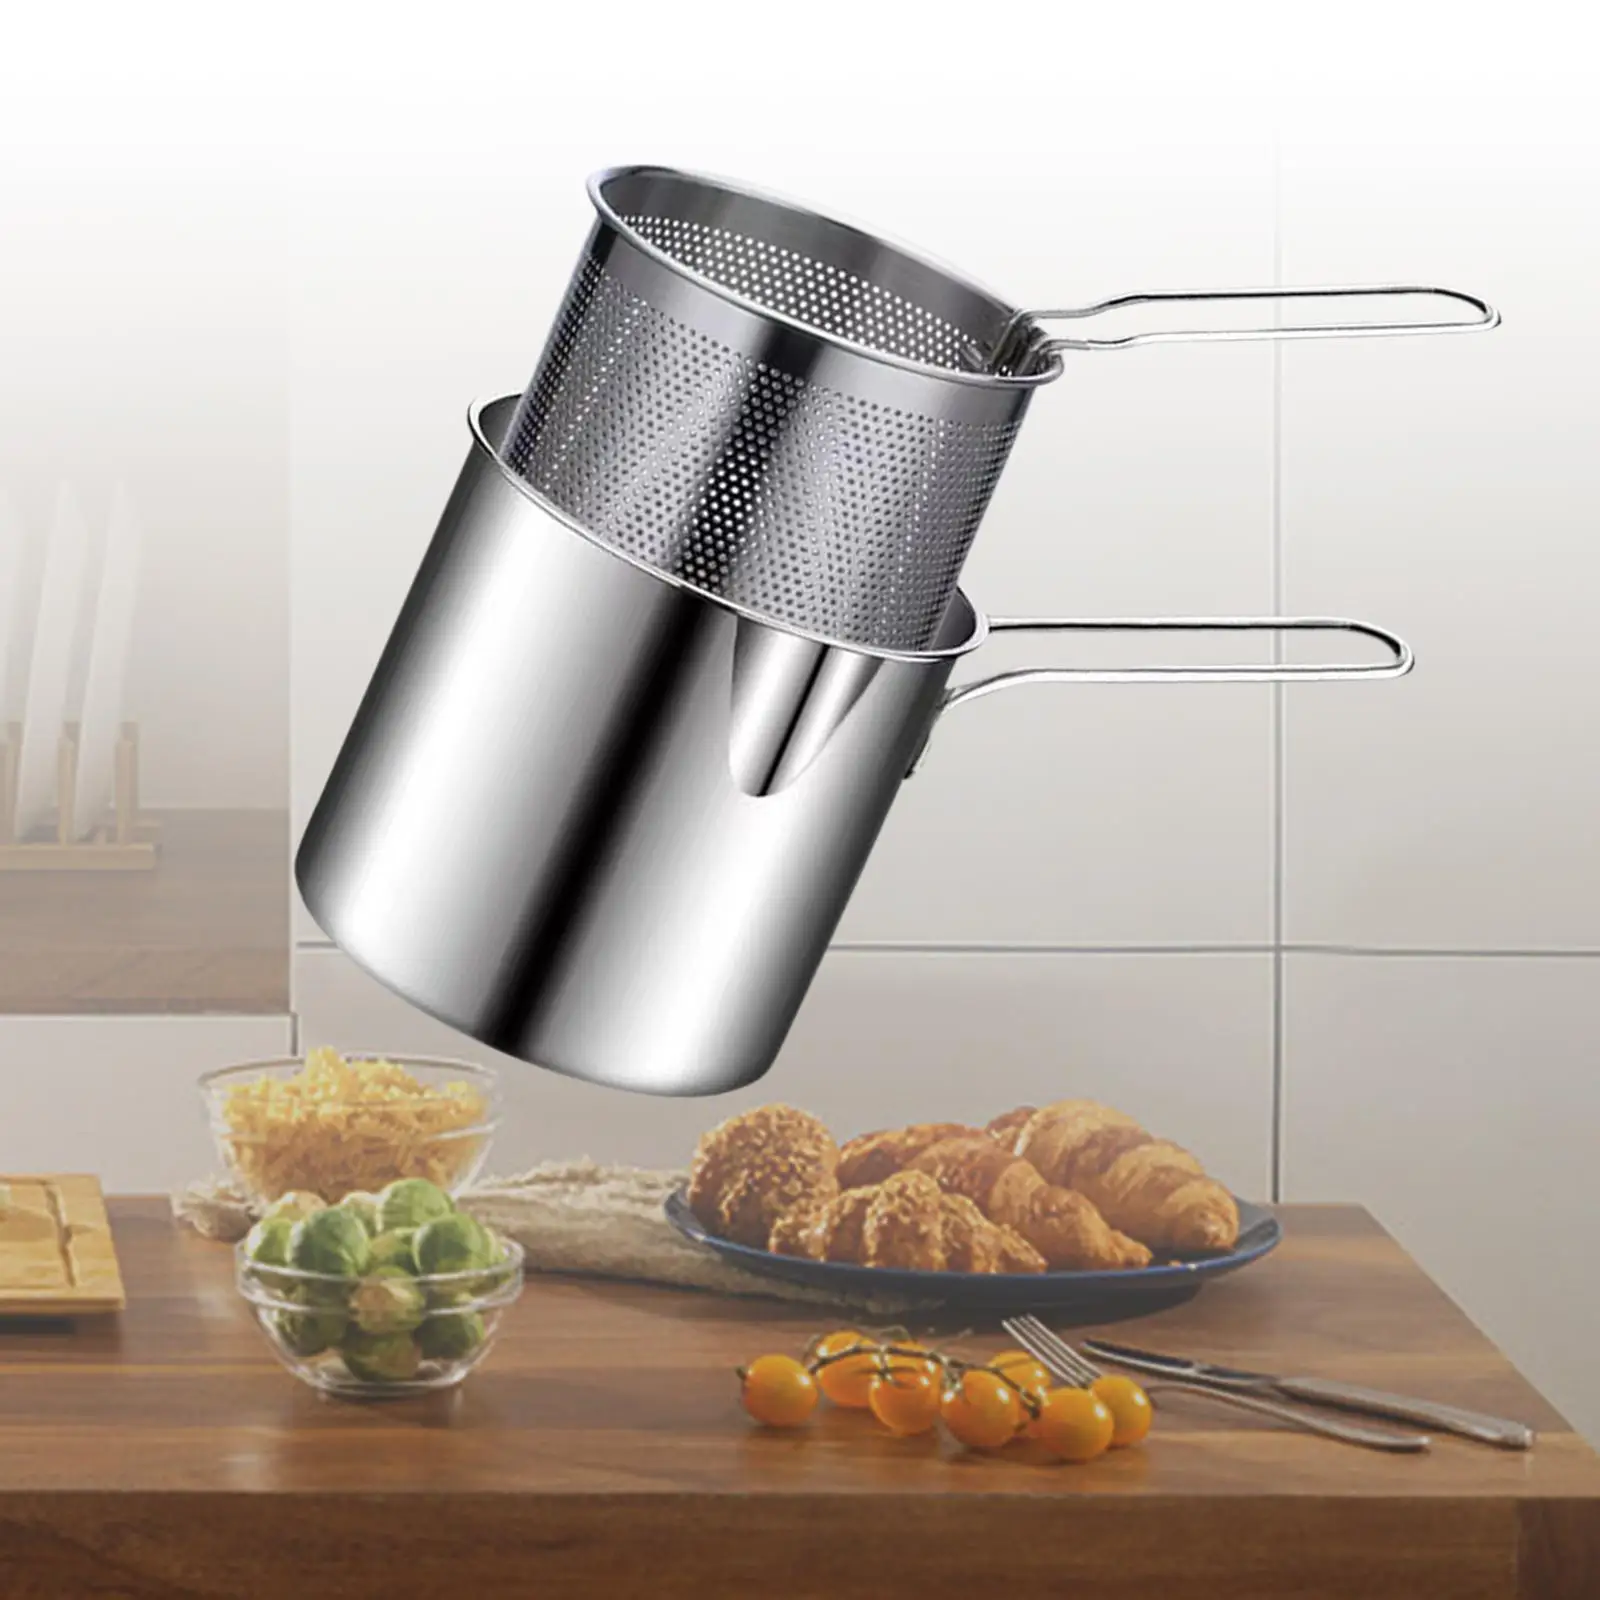 Deep Fryer Pot with Strainer Detachable for Tempura French Fries Outdoor